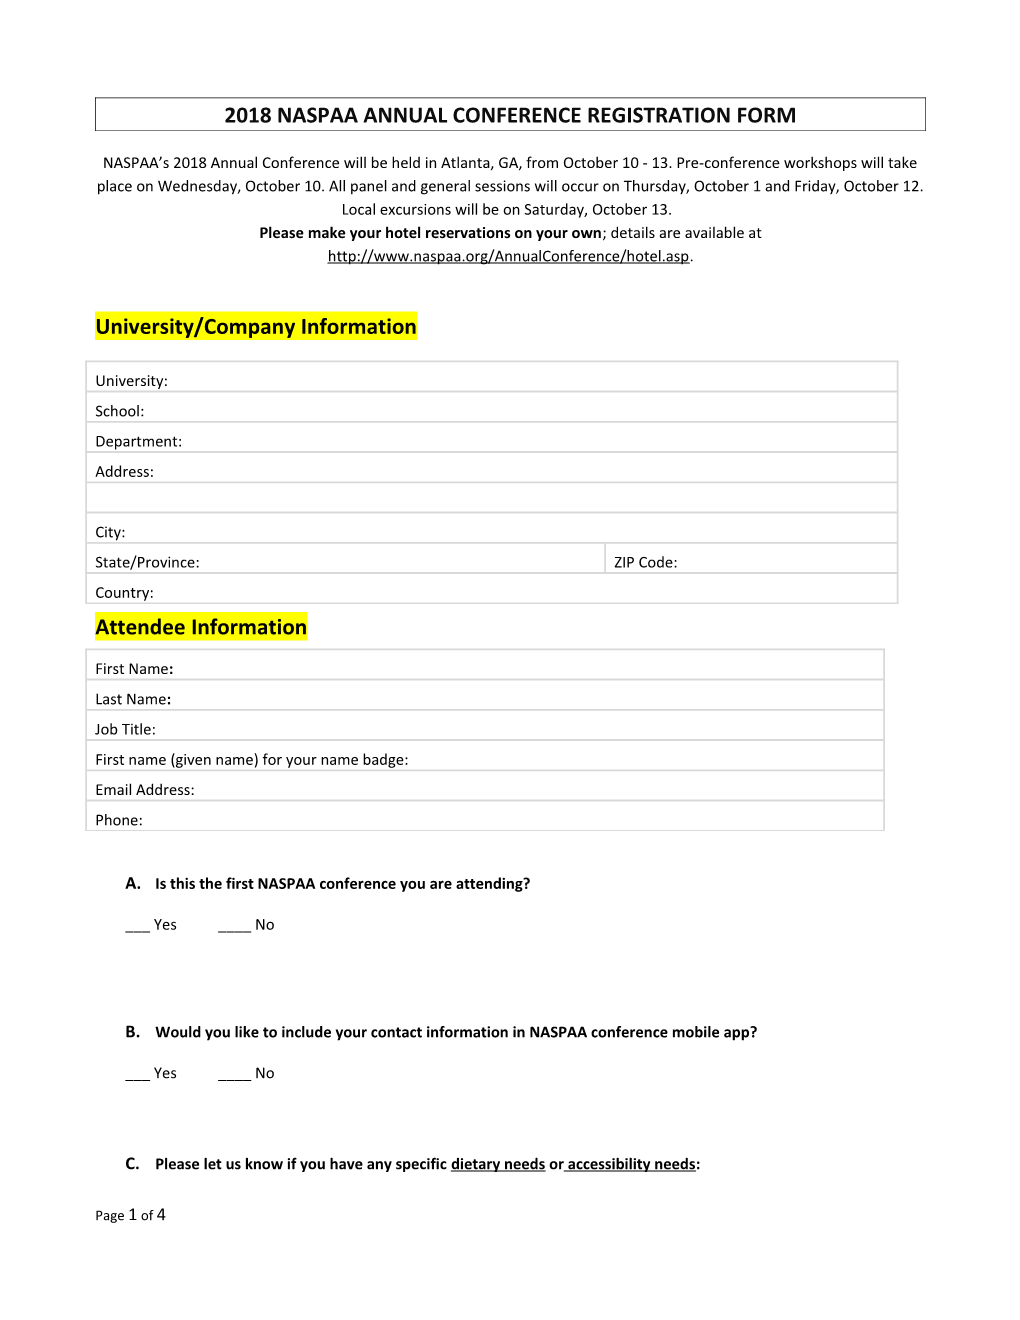 2018 Naspaa Annual Conference Registration Form